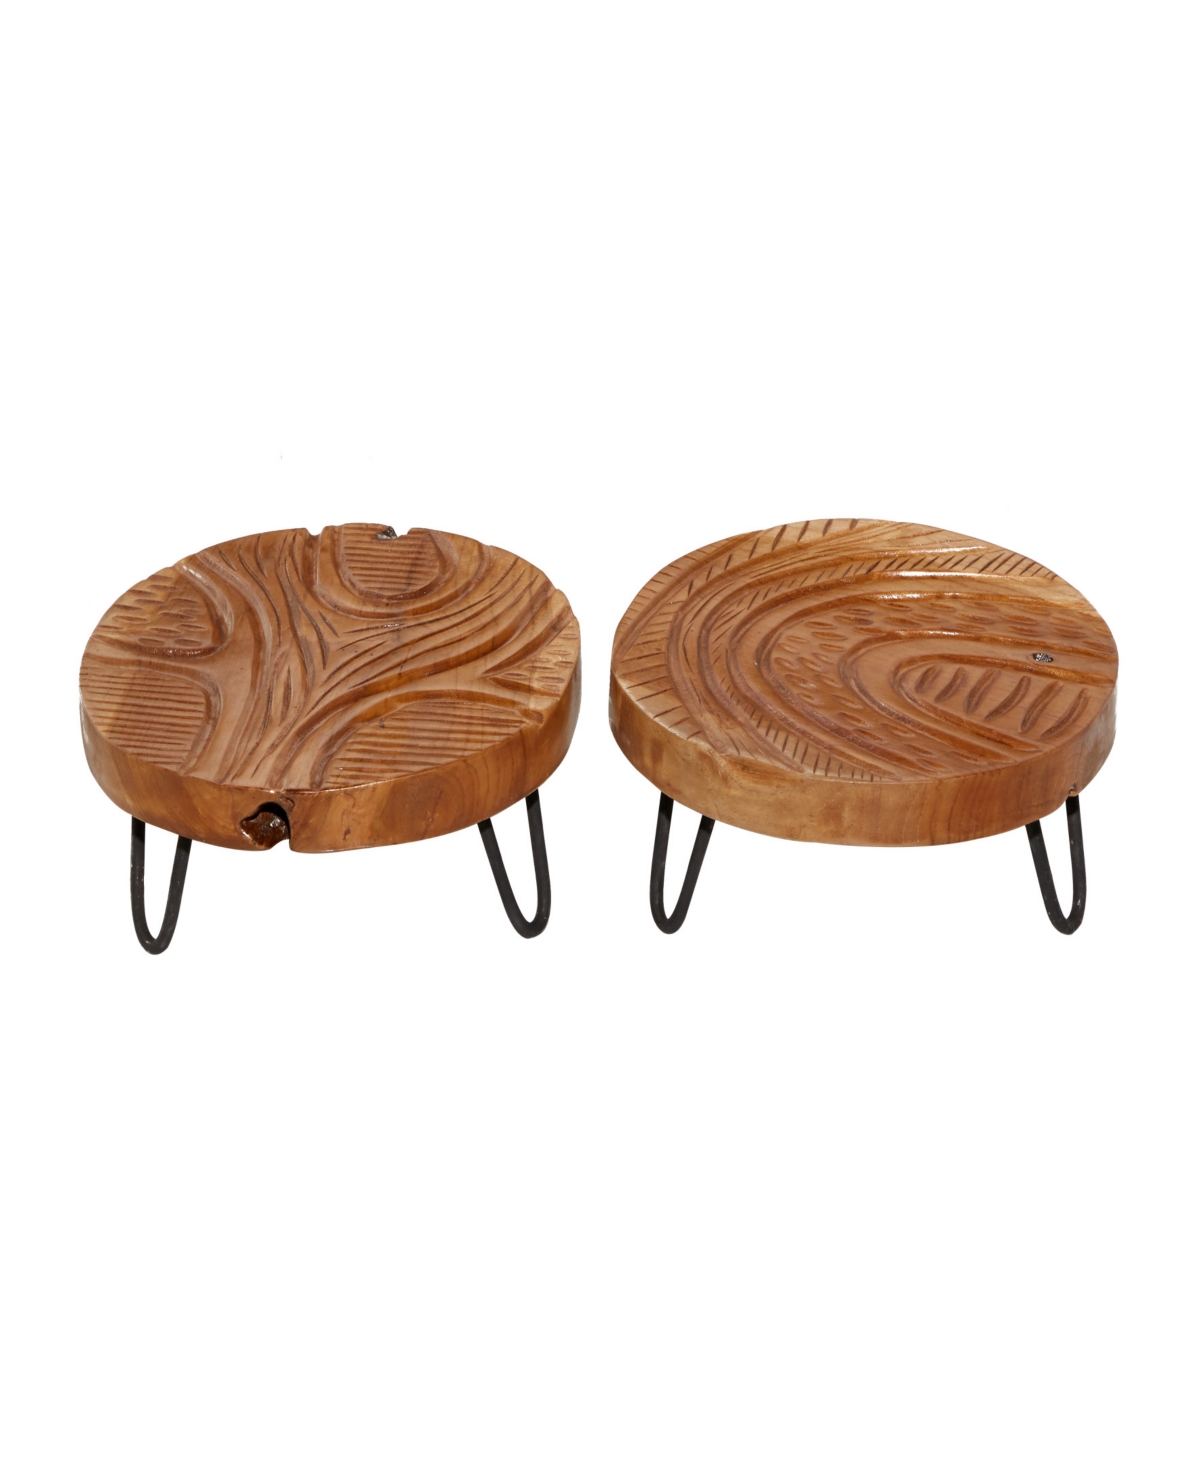 Rosemary Lane Teak Wood Intricate Carved Floral Tray, Set Of 2, 11", 11" W In Brown